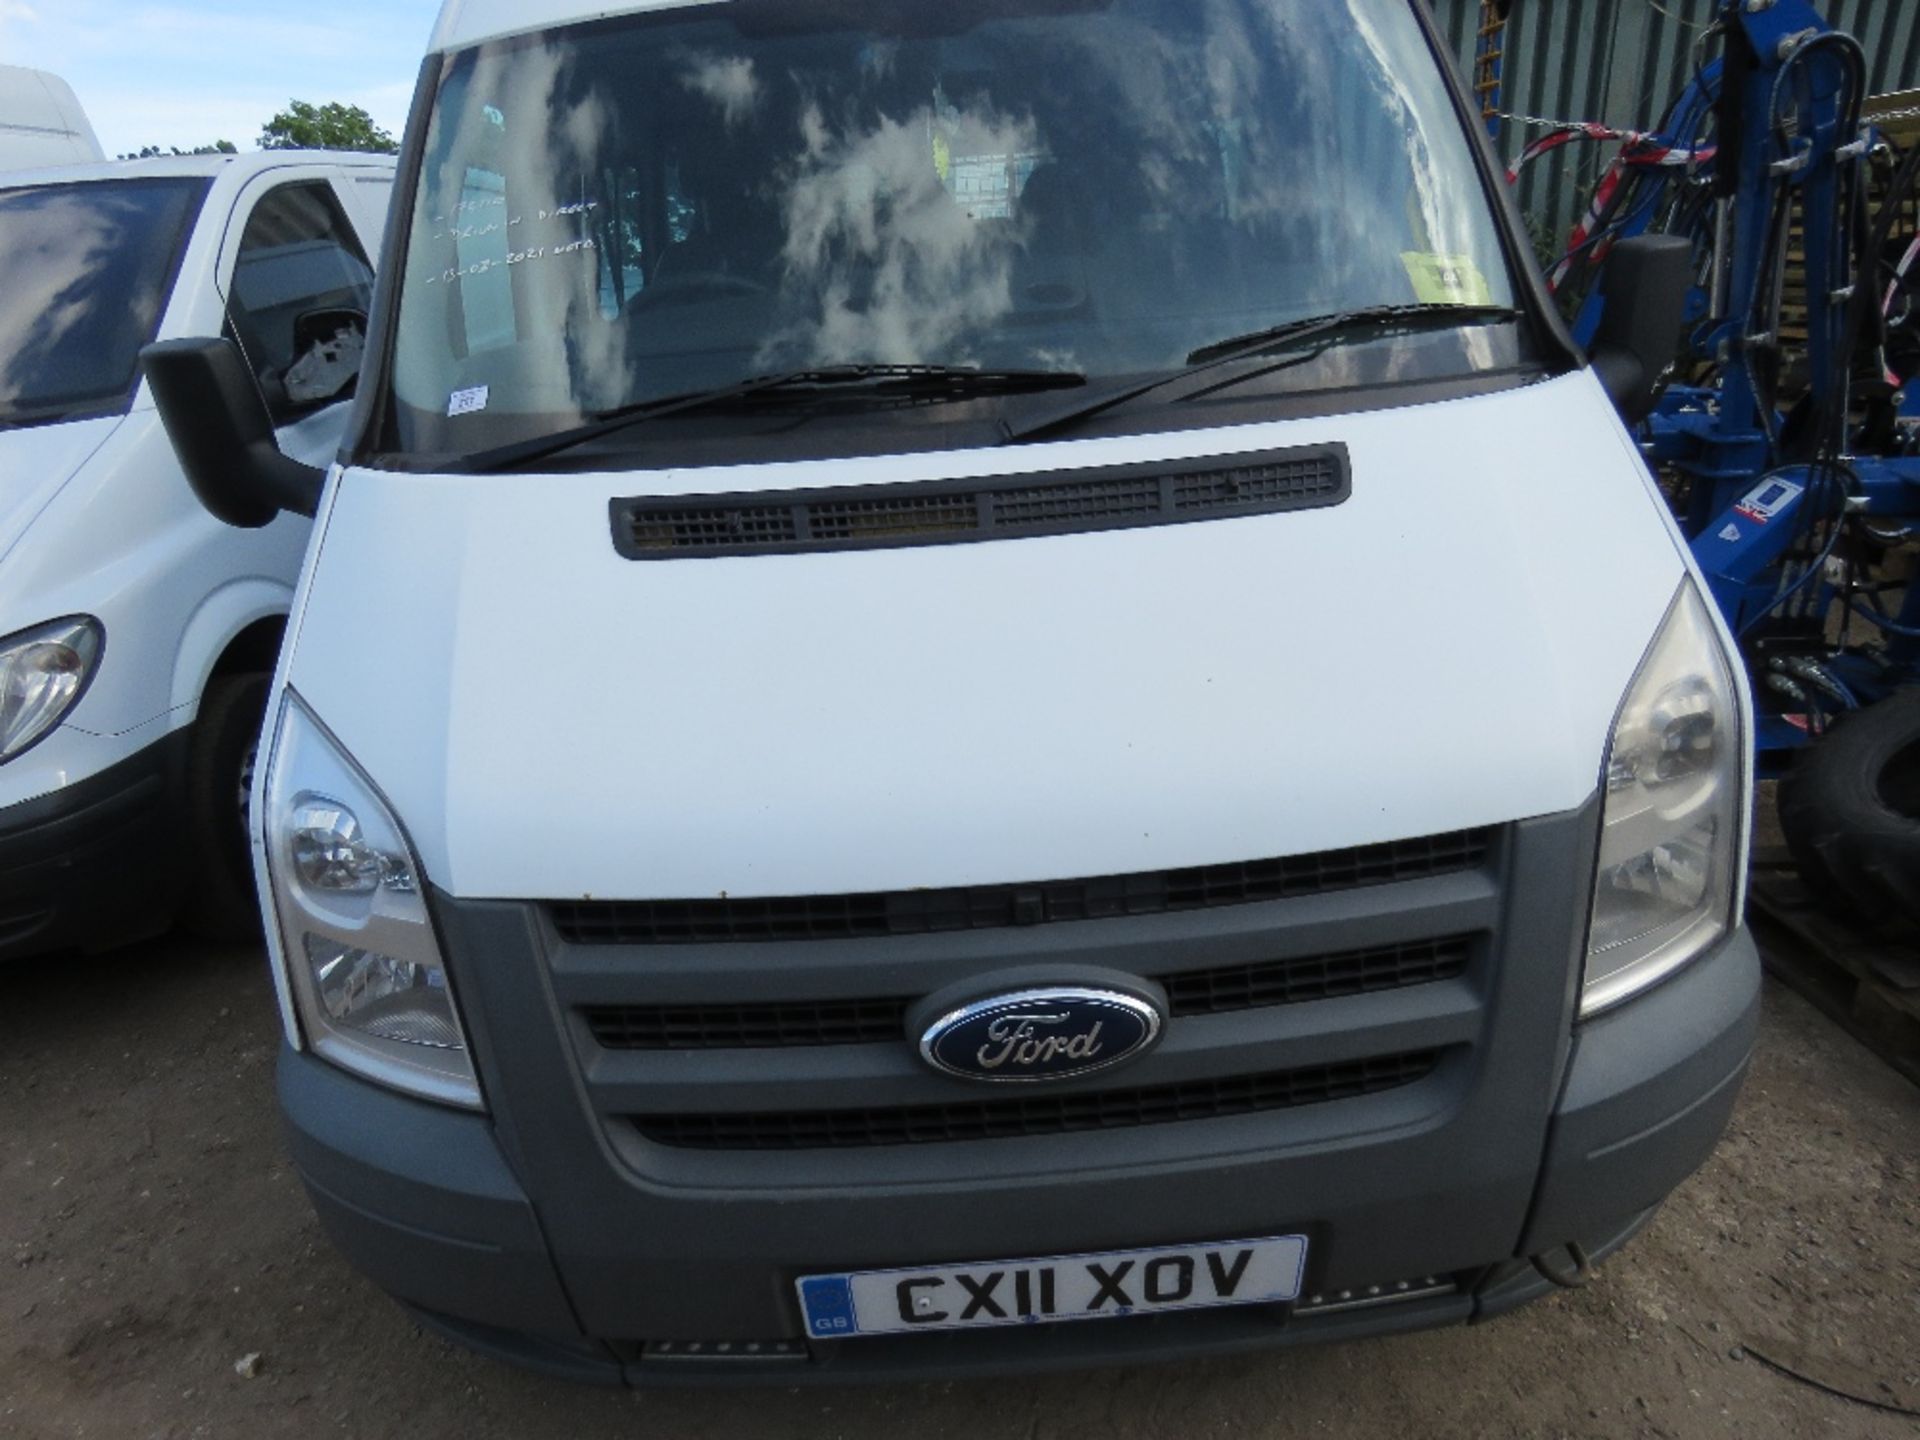 FORD TRANSIT 9 SEAT MINIBUS WITH REAR STORAGE AREA. REG:CX11XOV. TESTED TILL 13/03/2021. WITH V5. D - Image 4 of 7